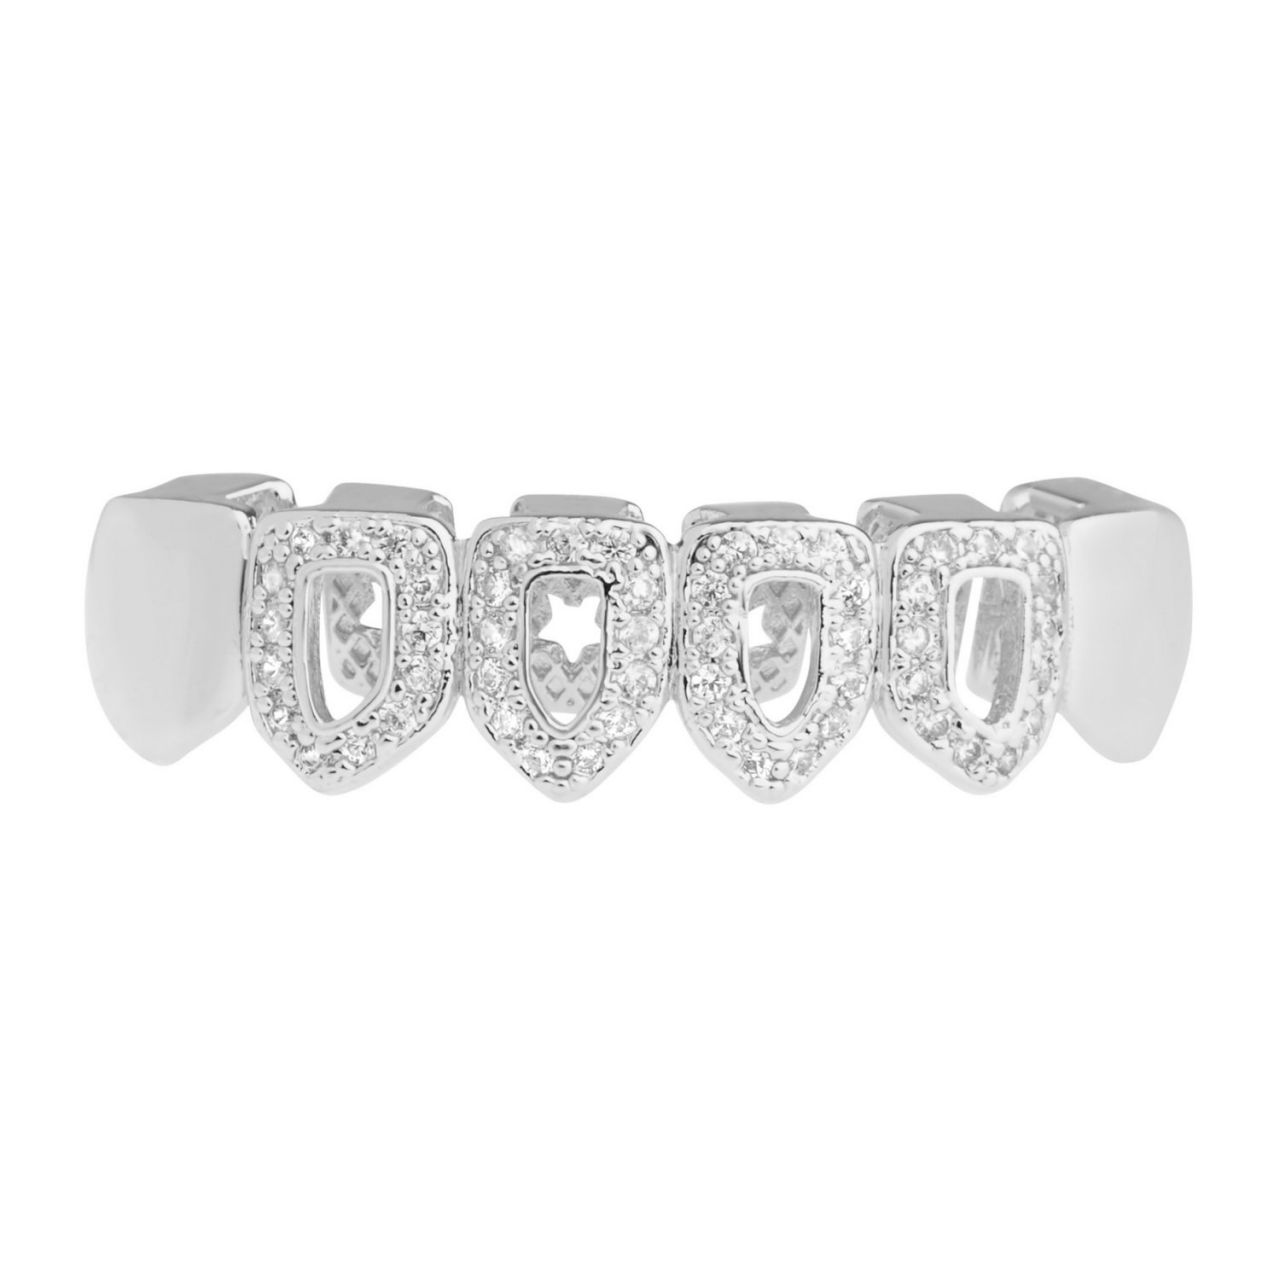 One size fits all Bottom Grillz - CUBIC ZIRKONIA offen